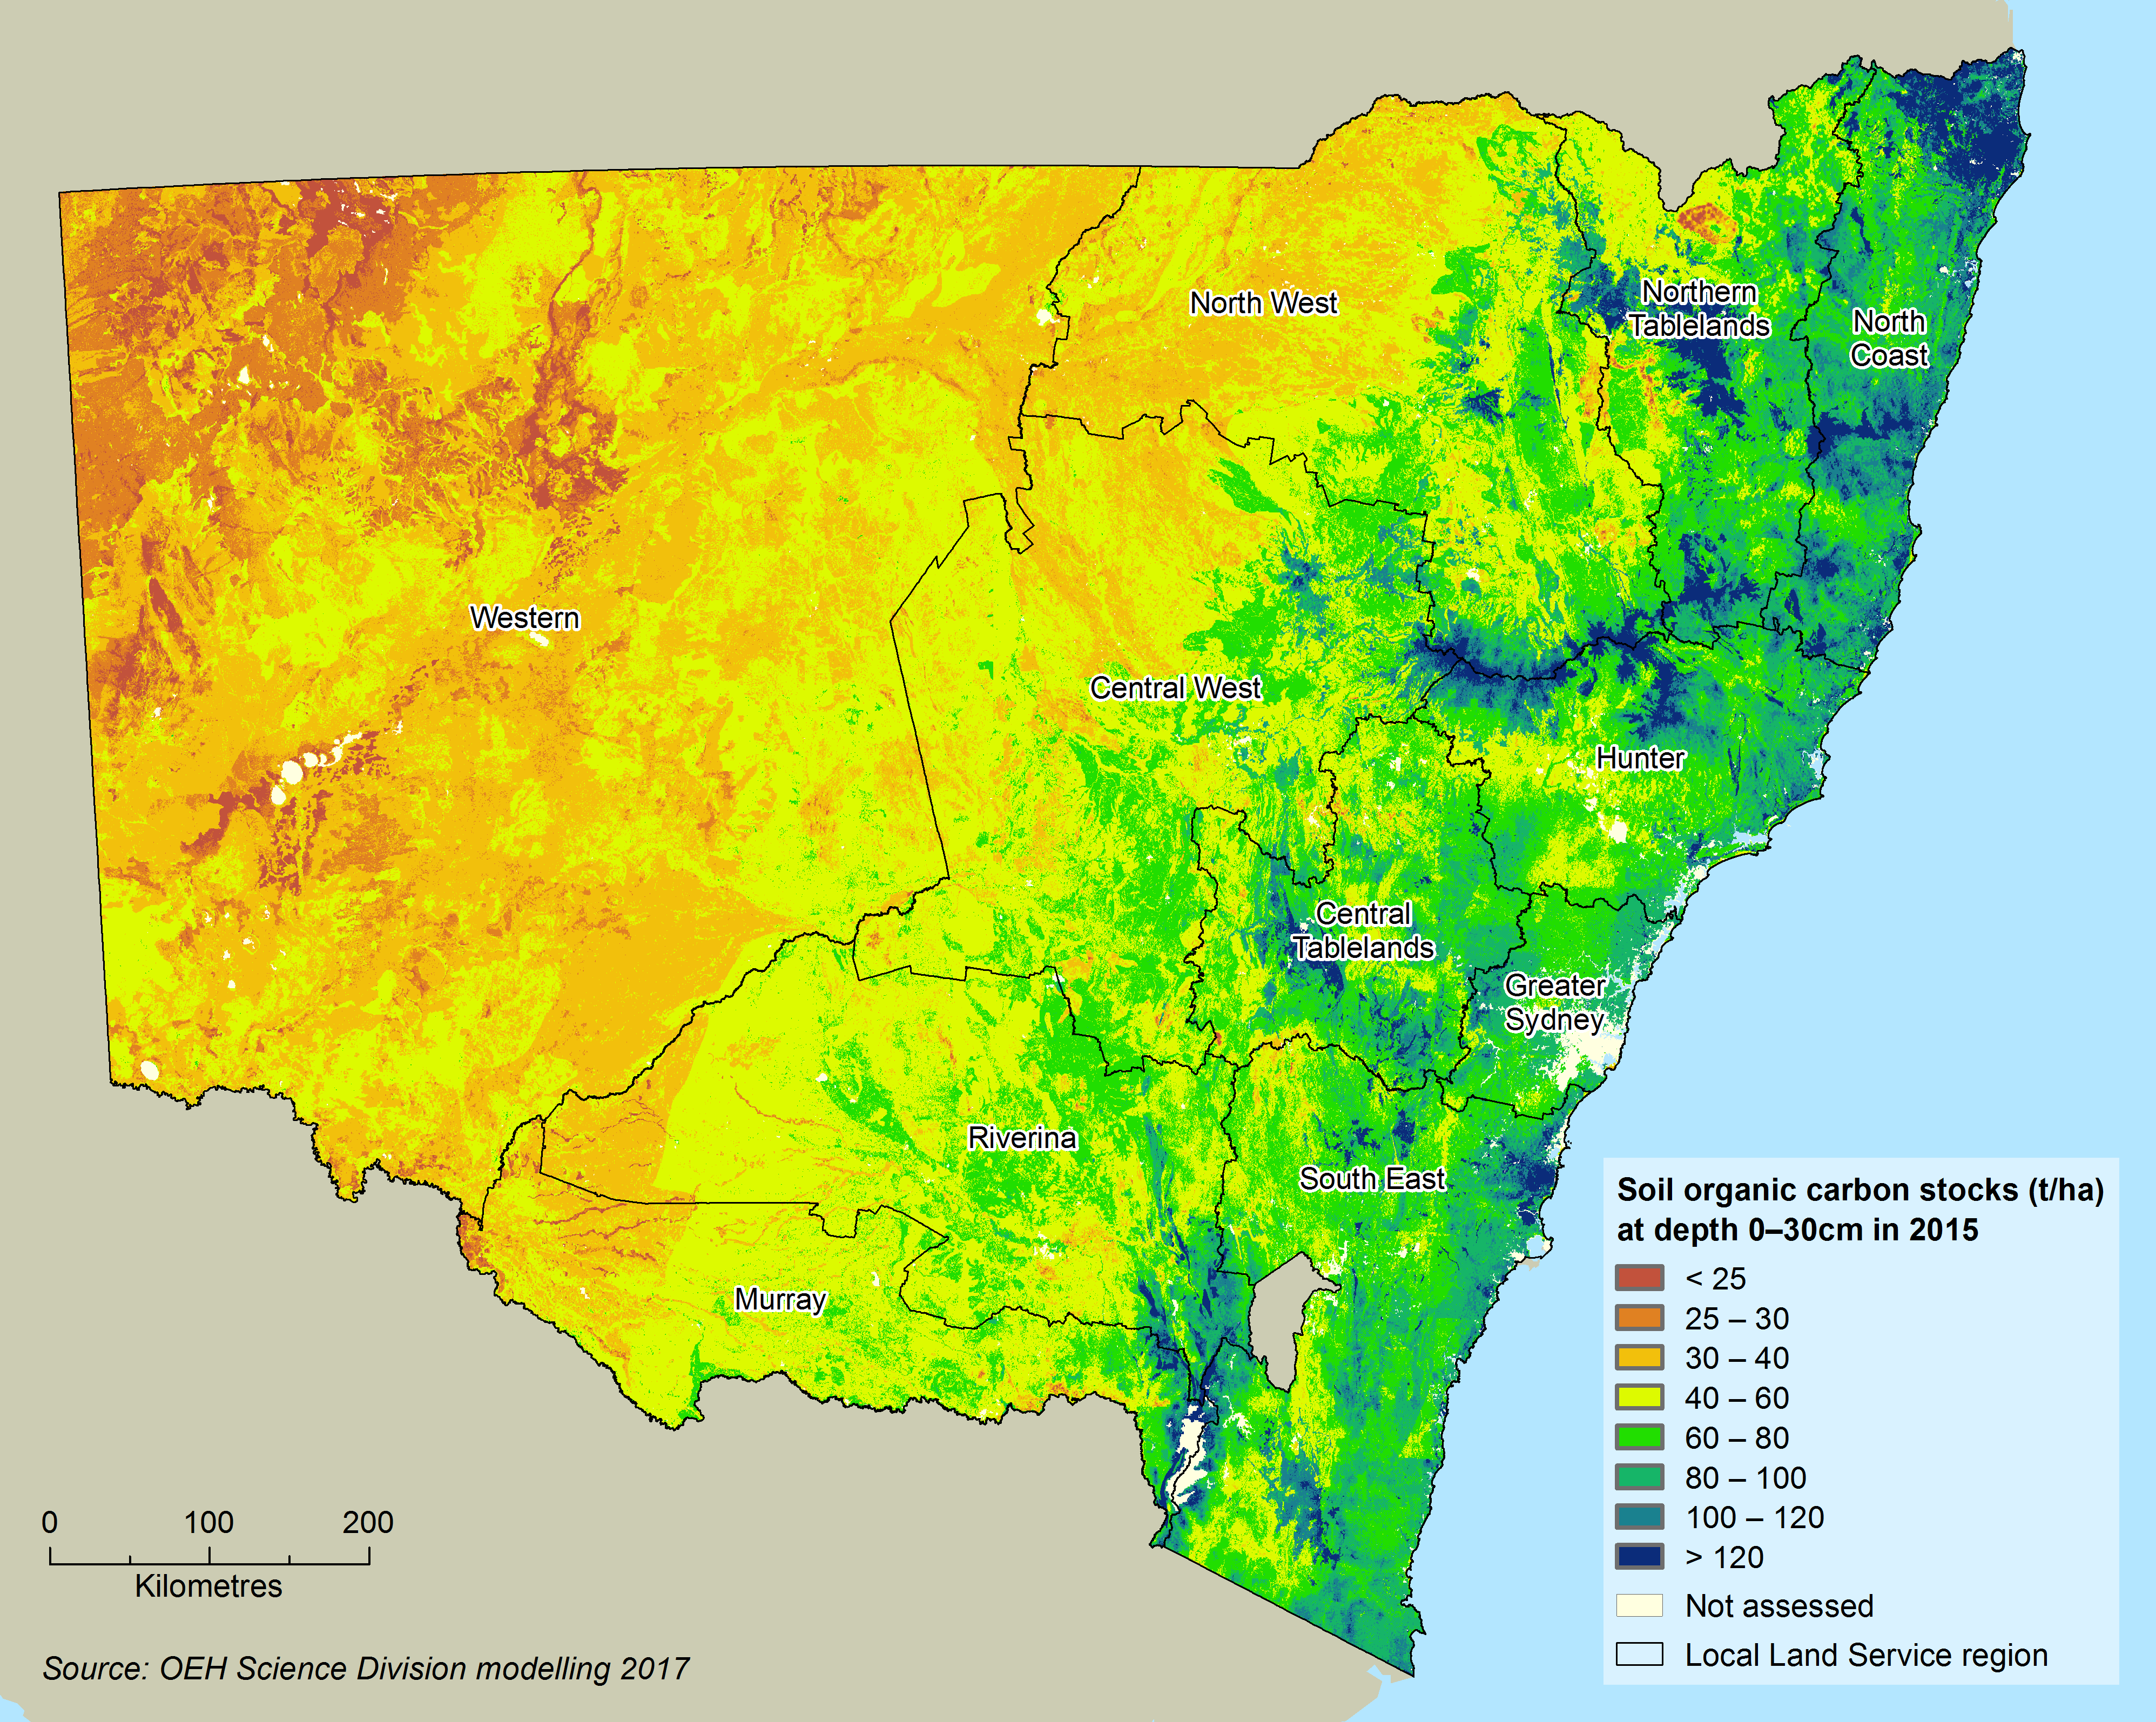 Map showing soil organic carbon levels in NSW, with low levels in the west grading to high levels along the coastal plains and ranges